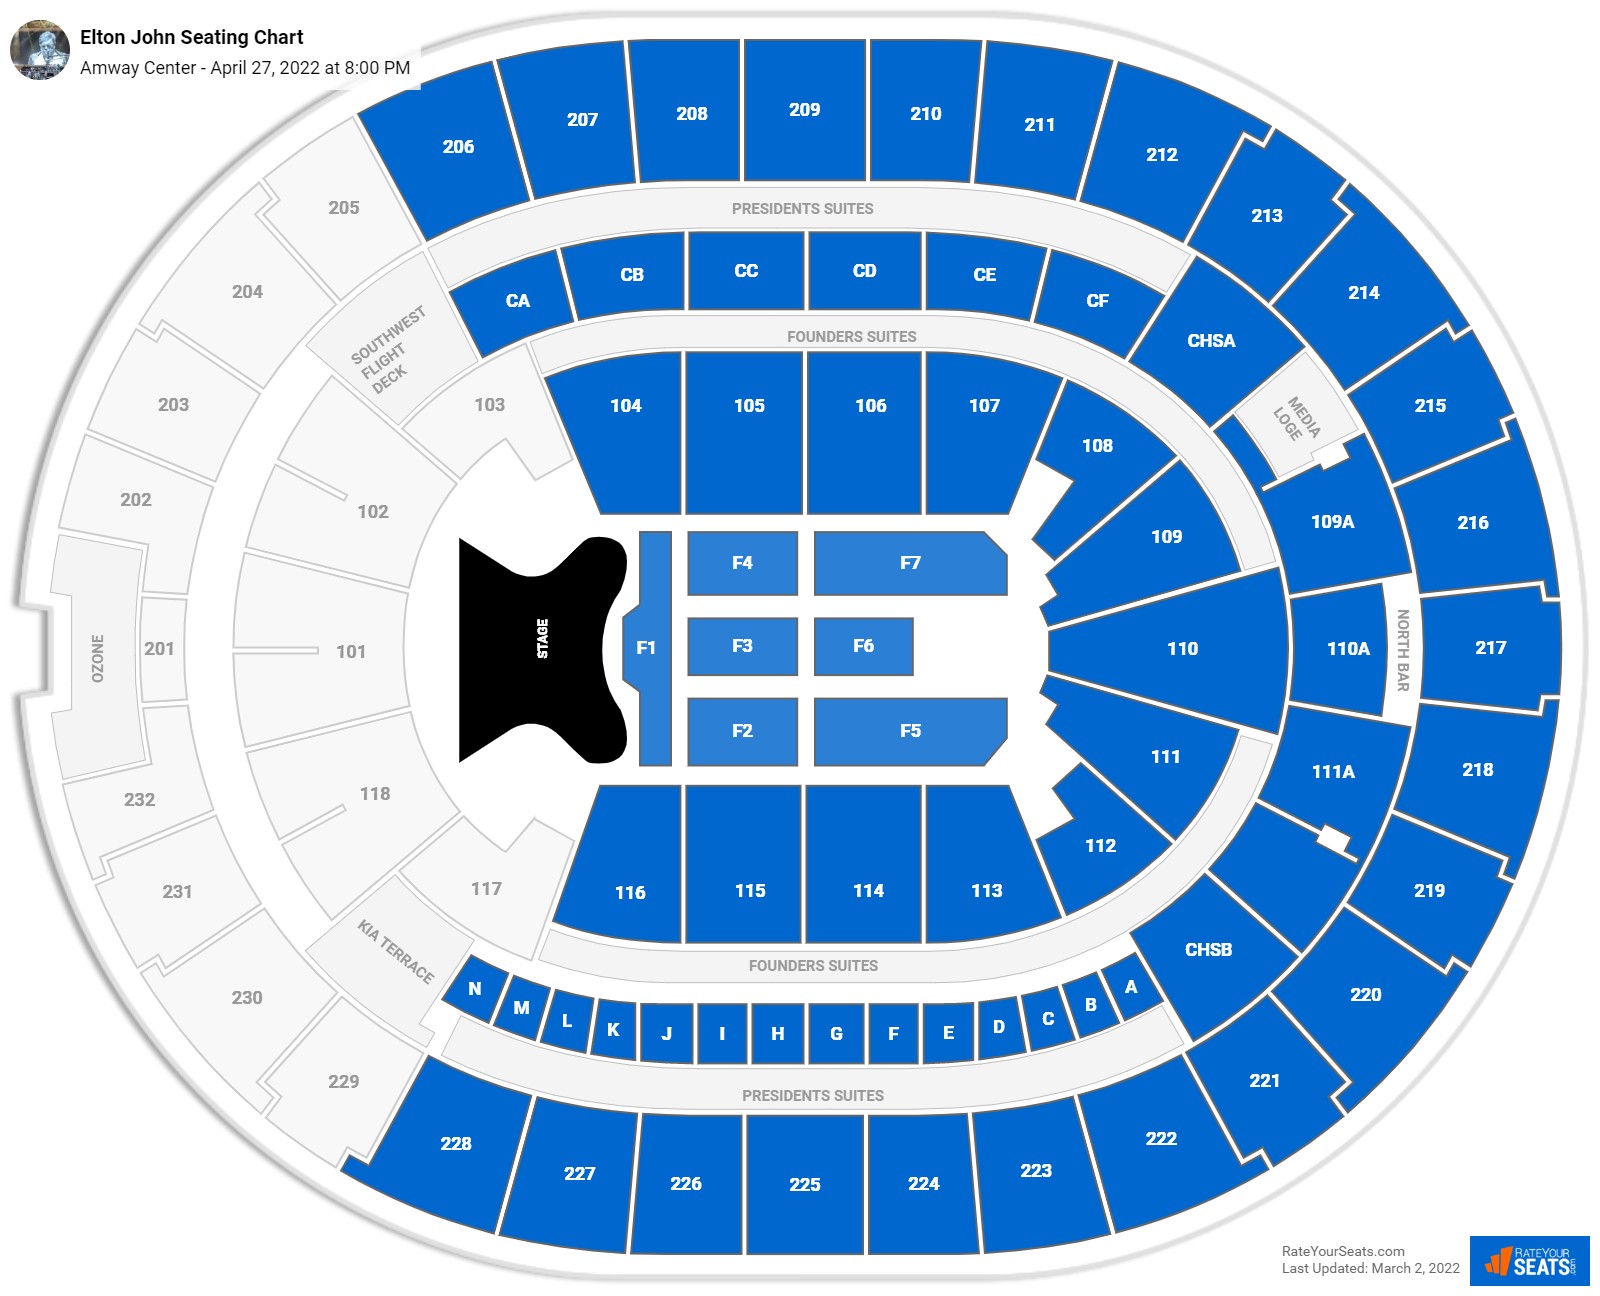 Amway Center Seating Charts for Concerts